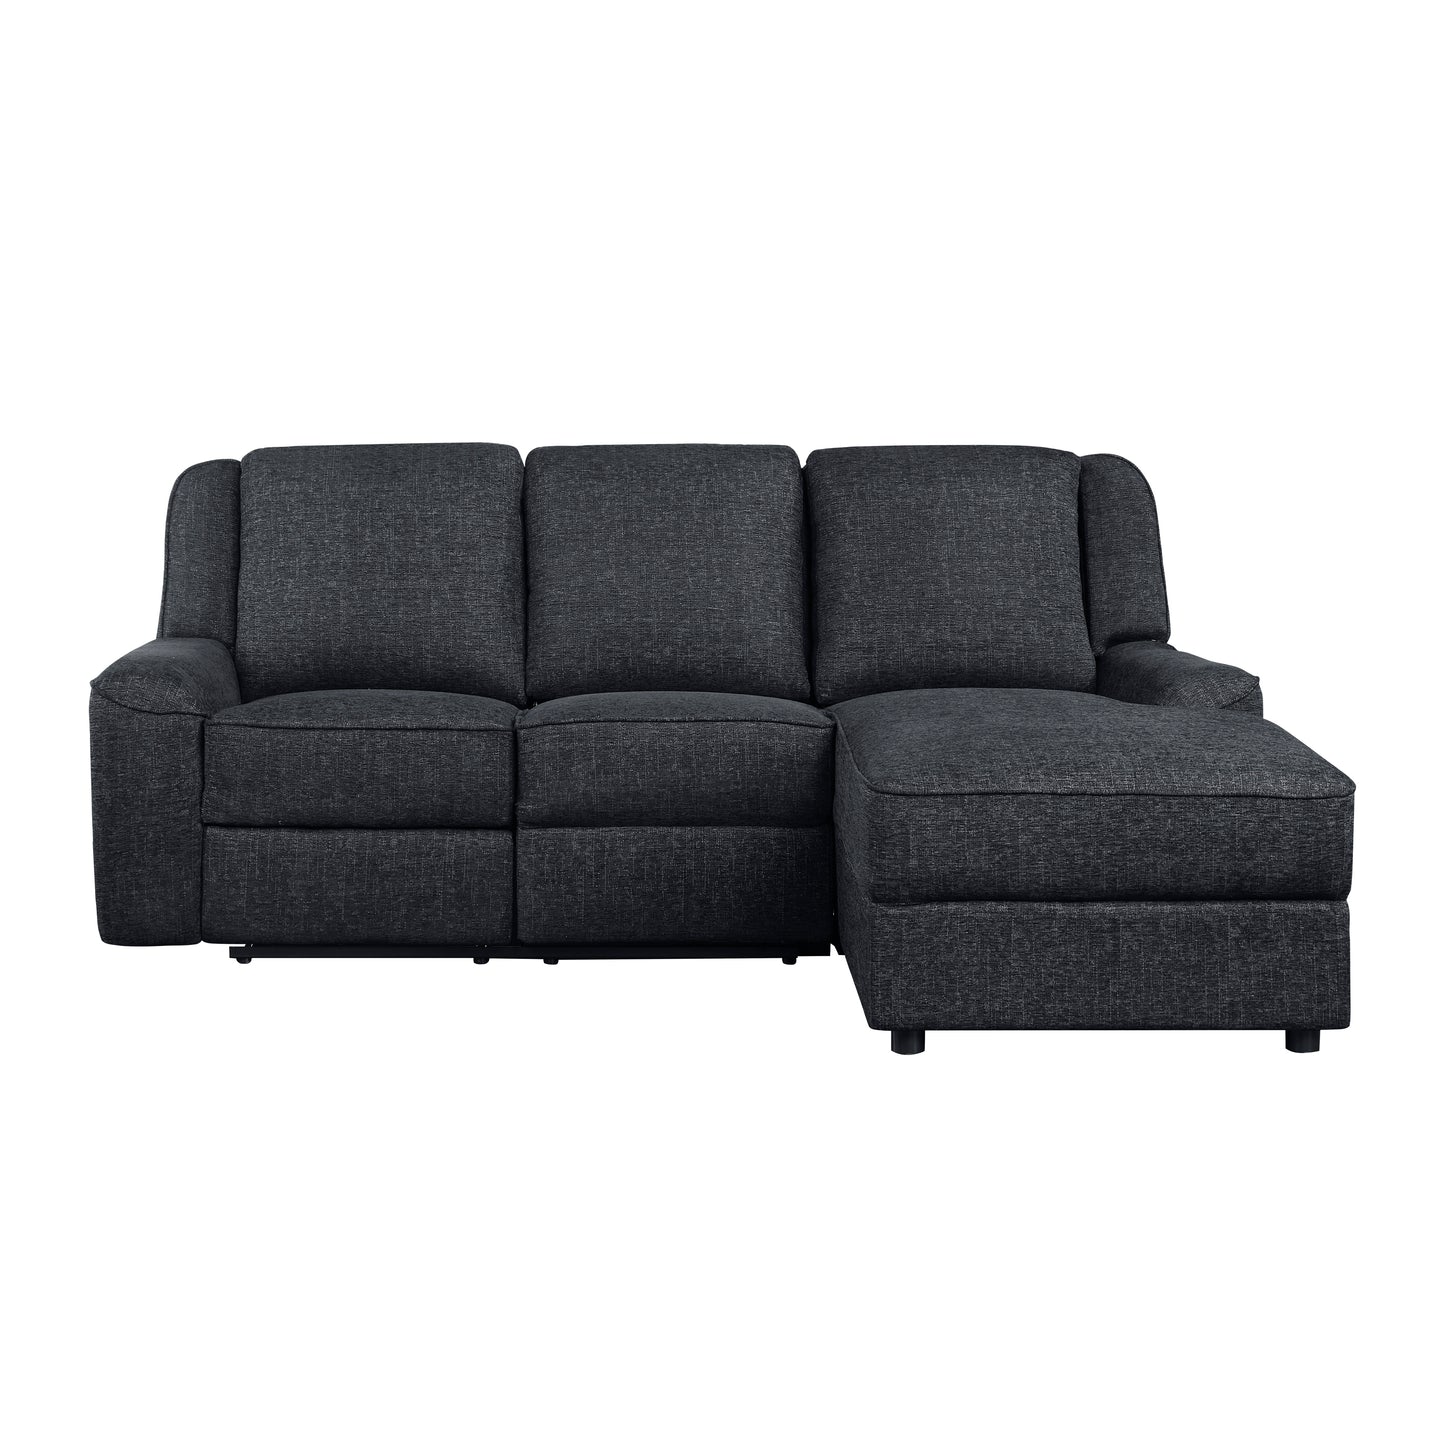 Monterey 2-Piece Reclining Sectional with Right Chaise EBONY ONLY